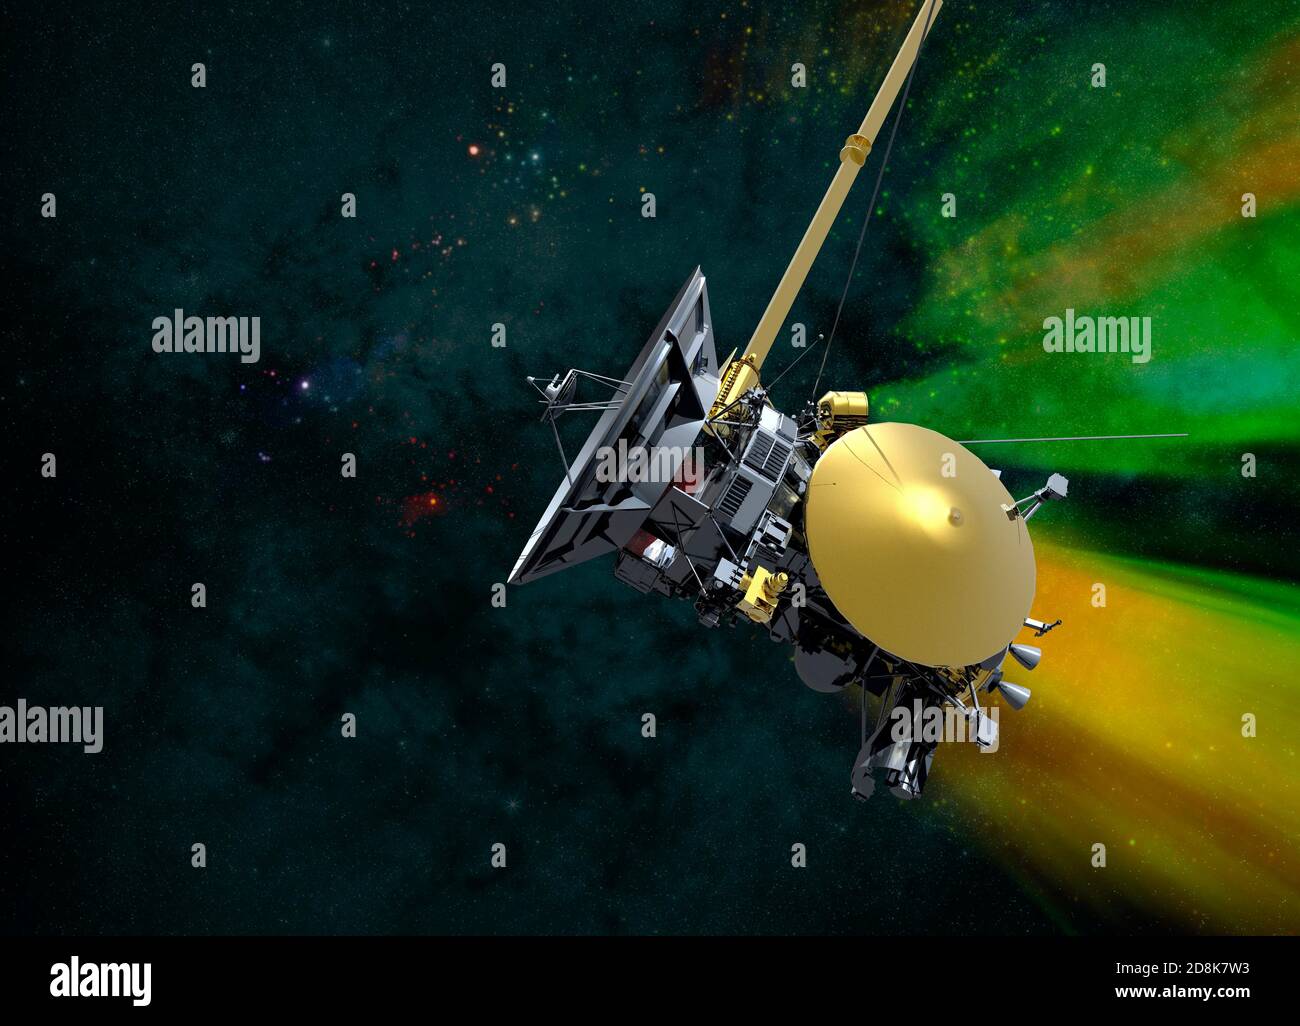 Illustration of the Cassini spacecraft. The Cassini spacecraft launched from Earth in 1997. It arrived at Saturn in 2004, spending the next 13 years surveying the Saturnian system (planet, moons and rings). It returned many images and observations, making many new discoveries. Its mission ended Stock Photo